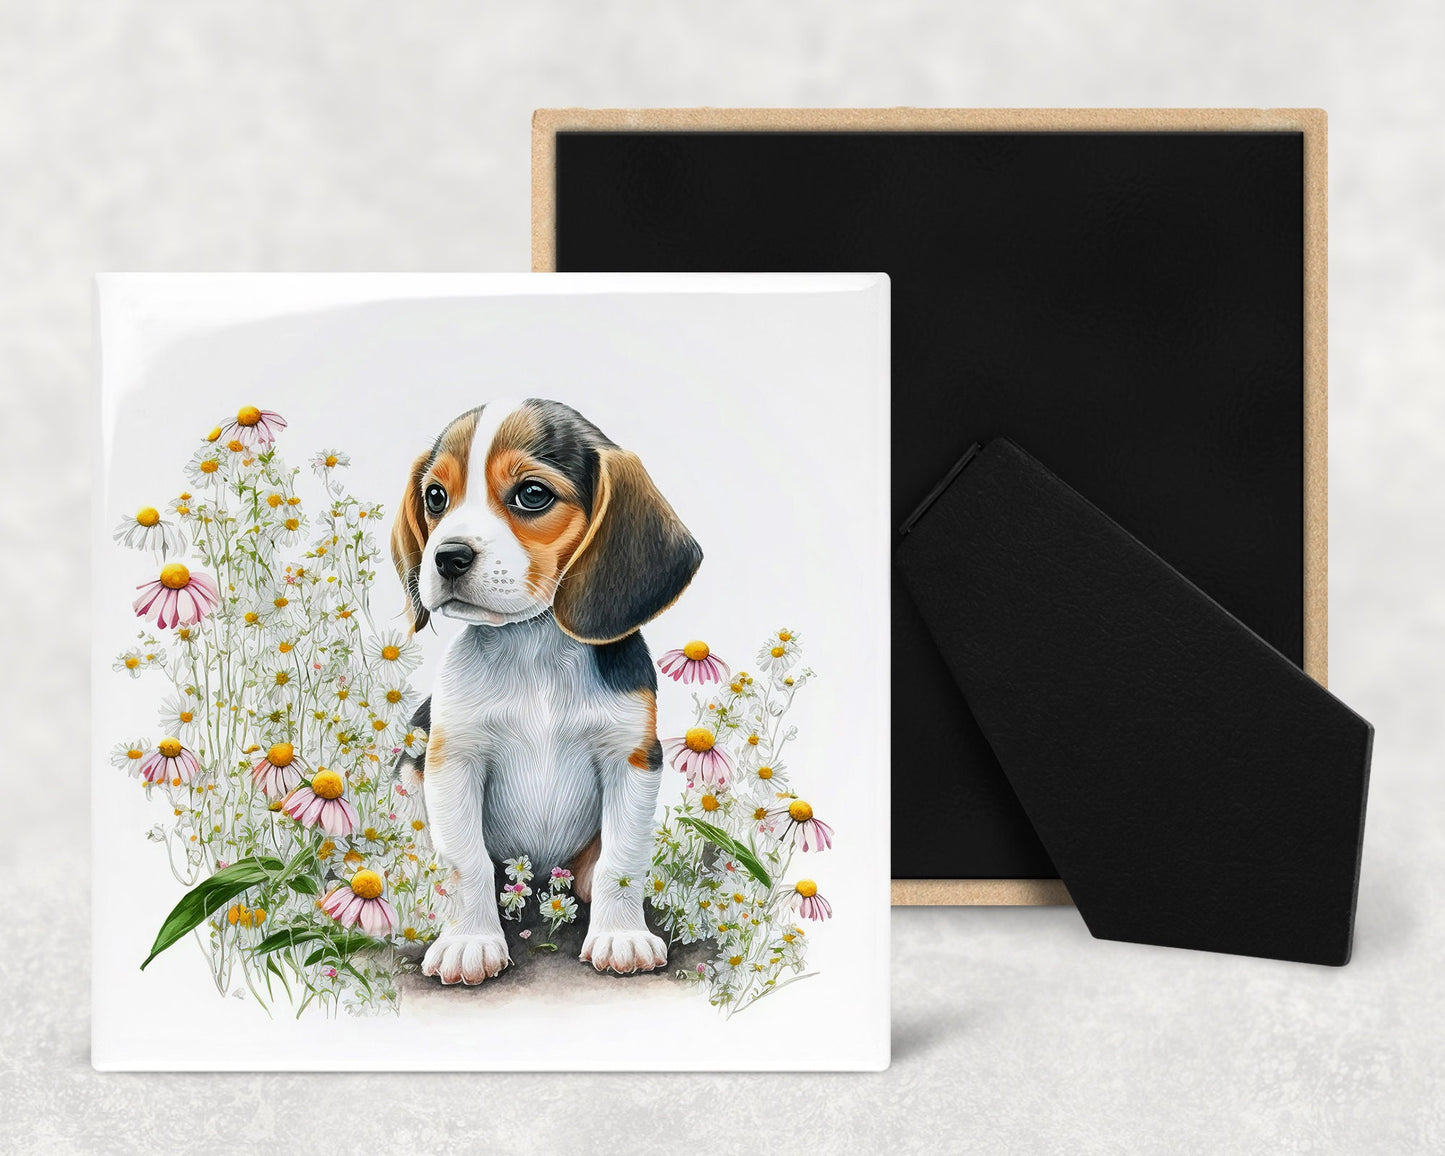 Cute Beagle Puppy Art Decorative Ceramic Tile Set with Optional Easel Back - Available in 4 sizes - Set of 4